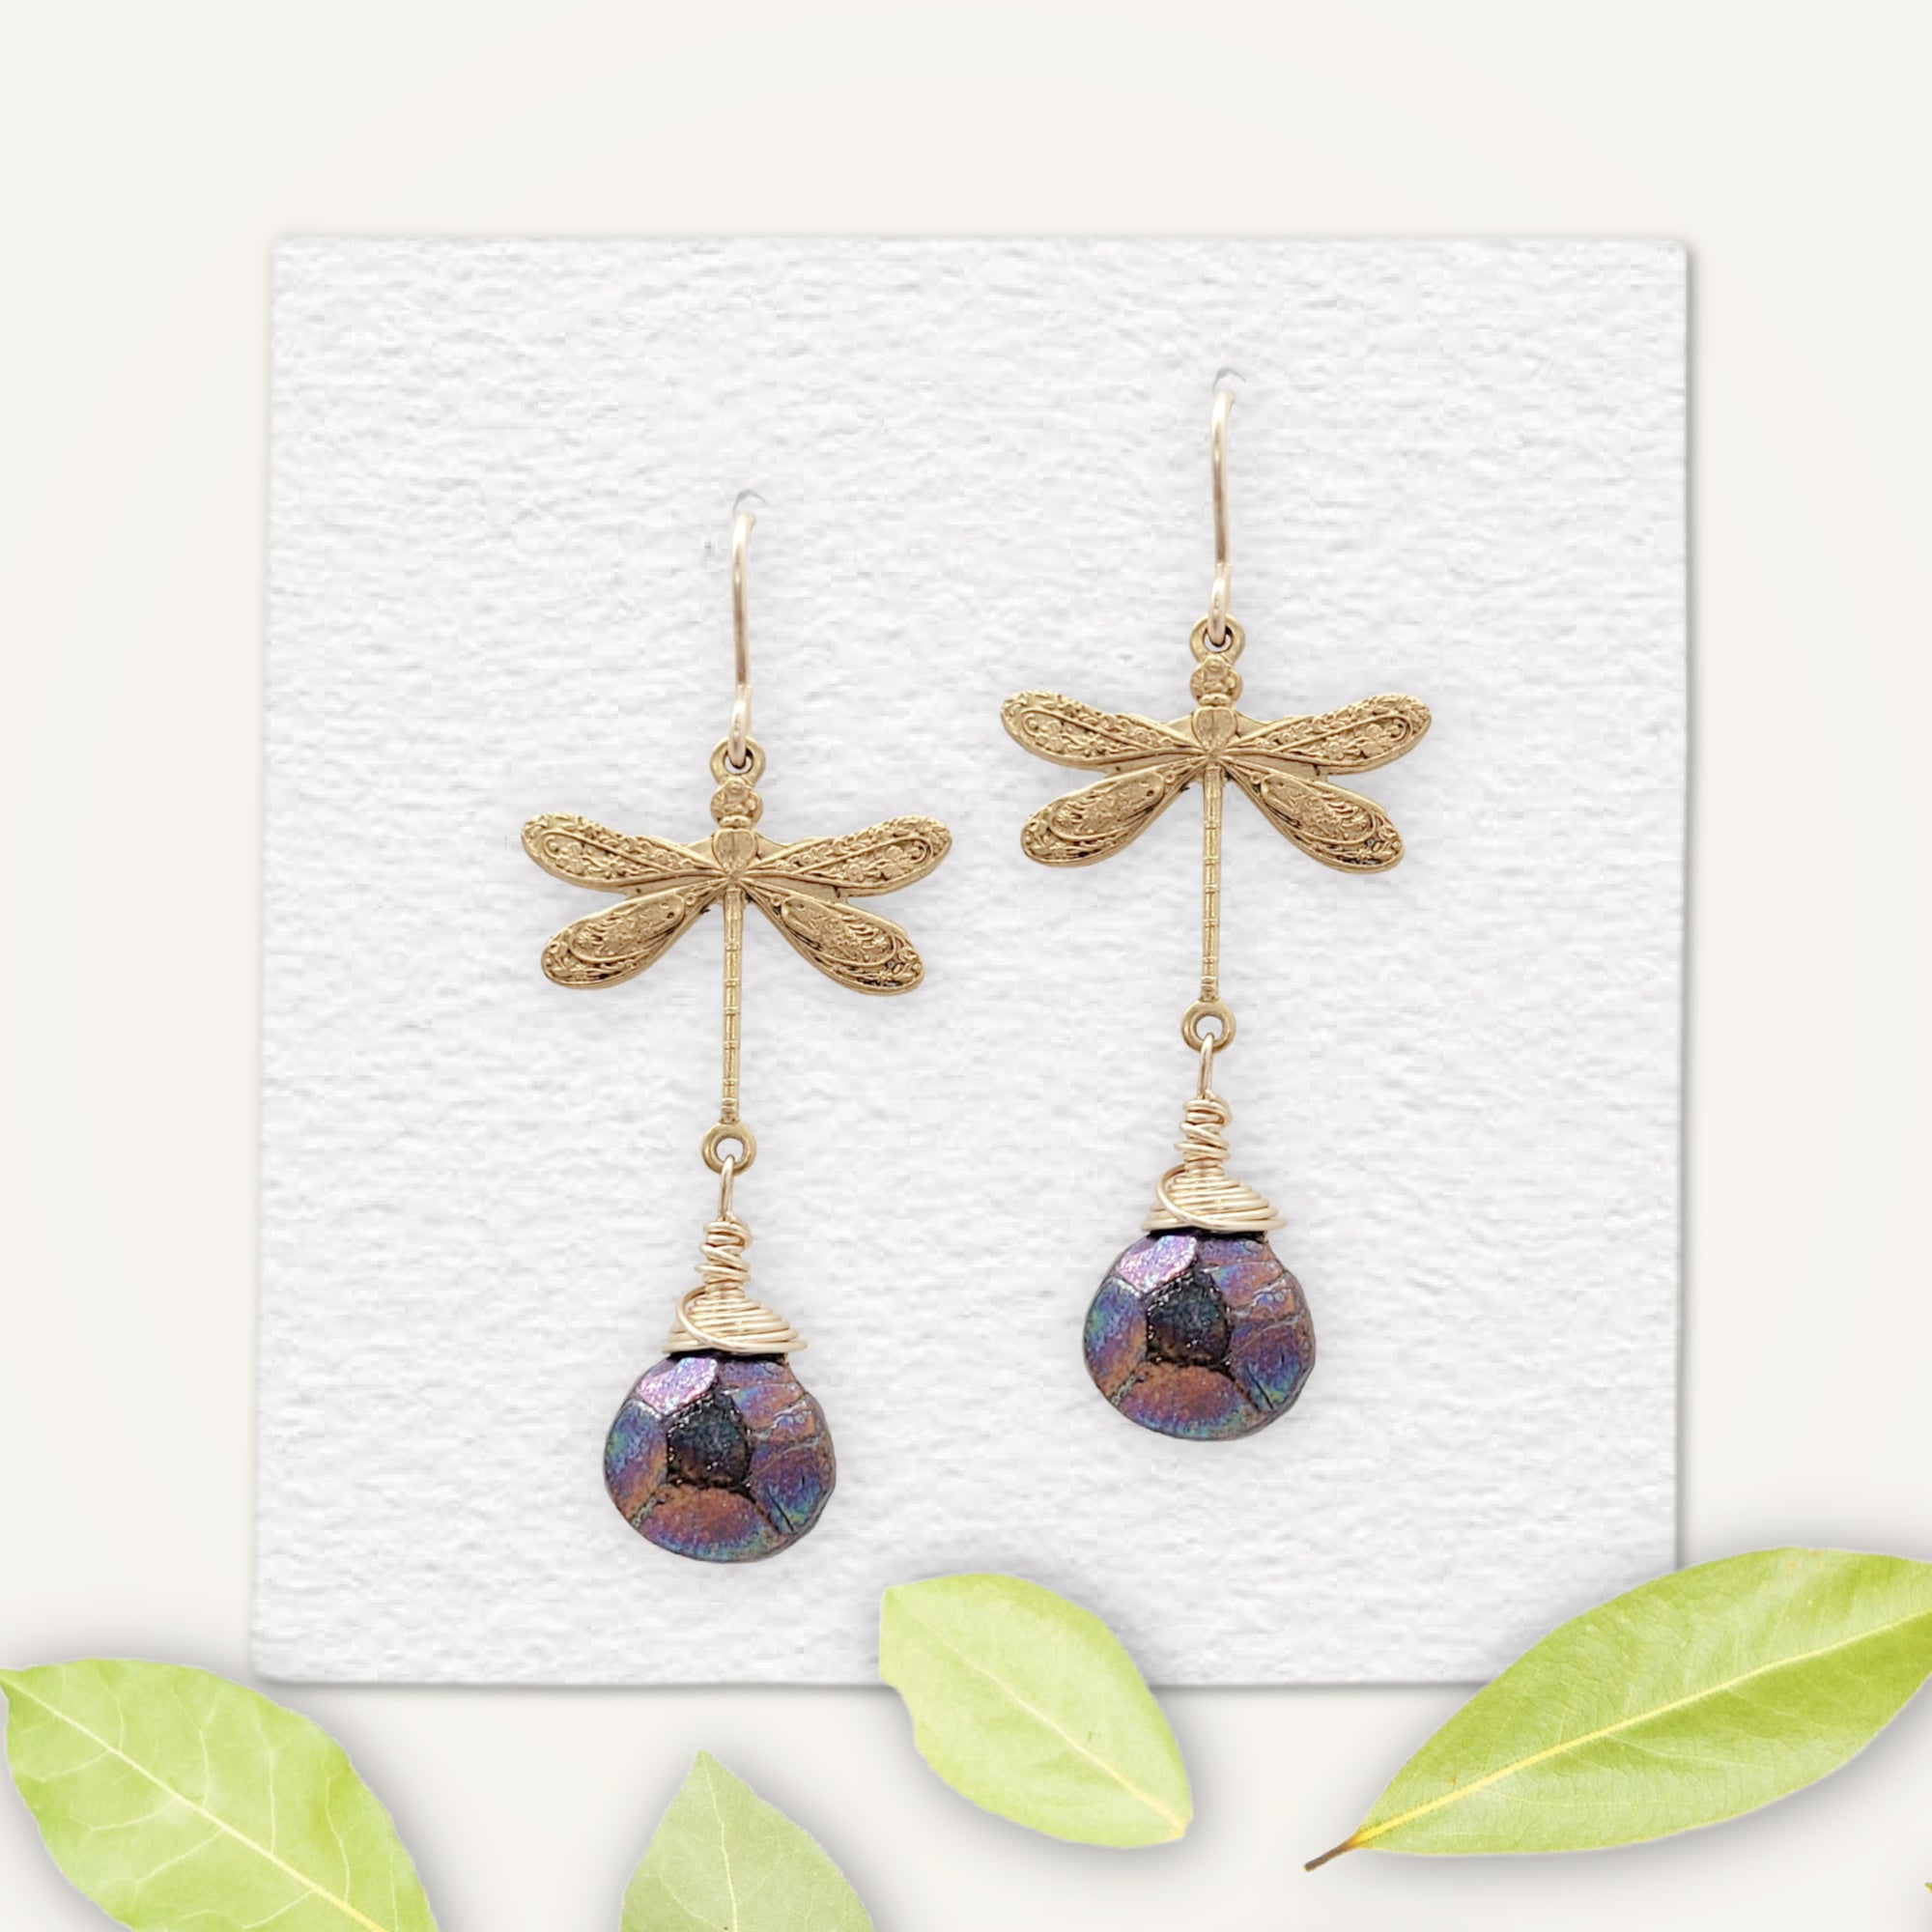 Dragonfly Earrings • Iridescent